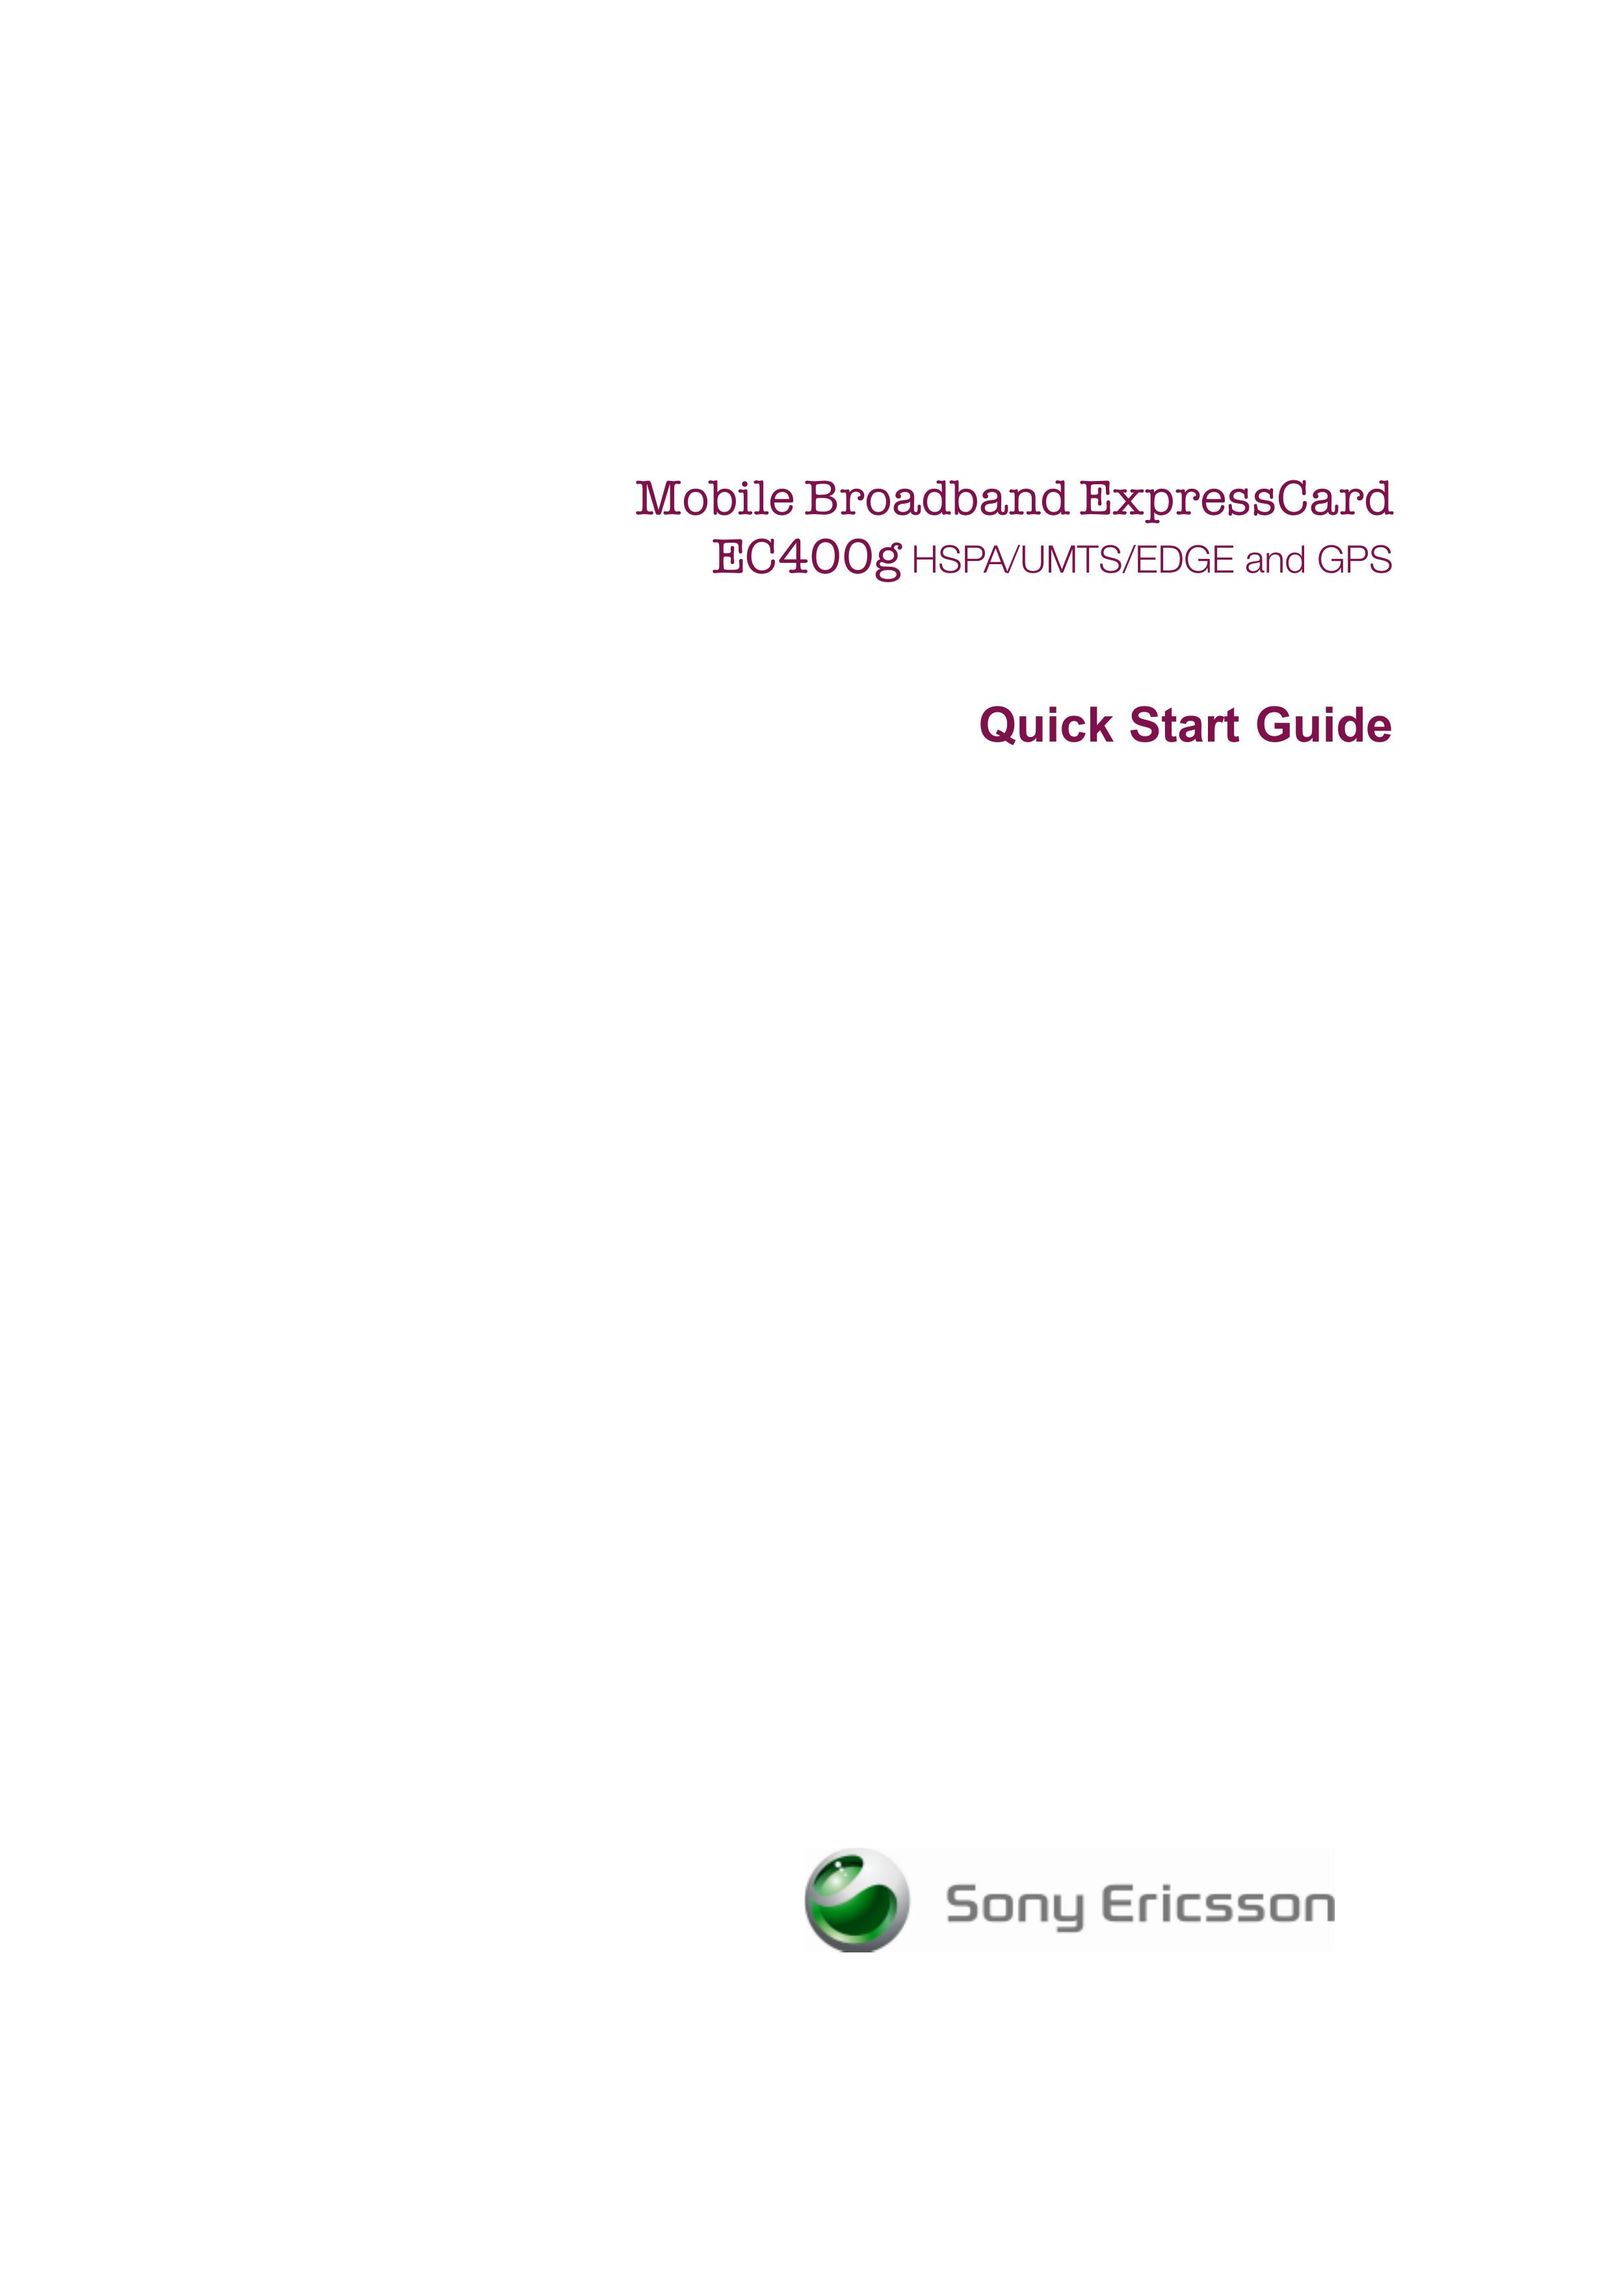 Sony Ericsson EC400G Network Router User Manual